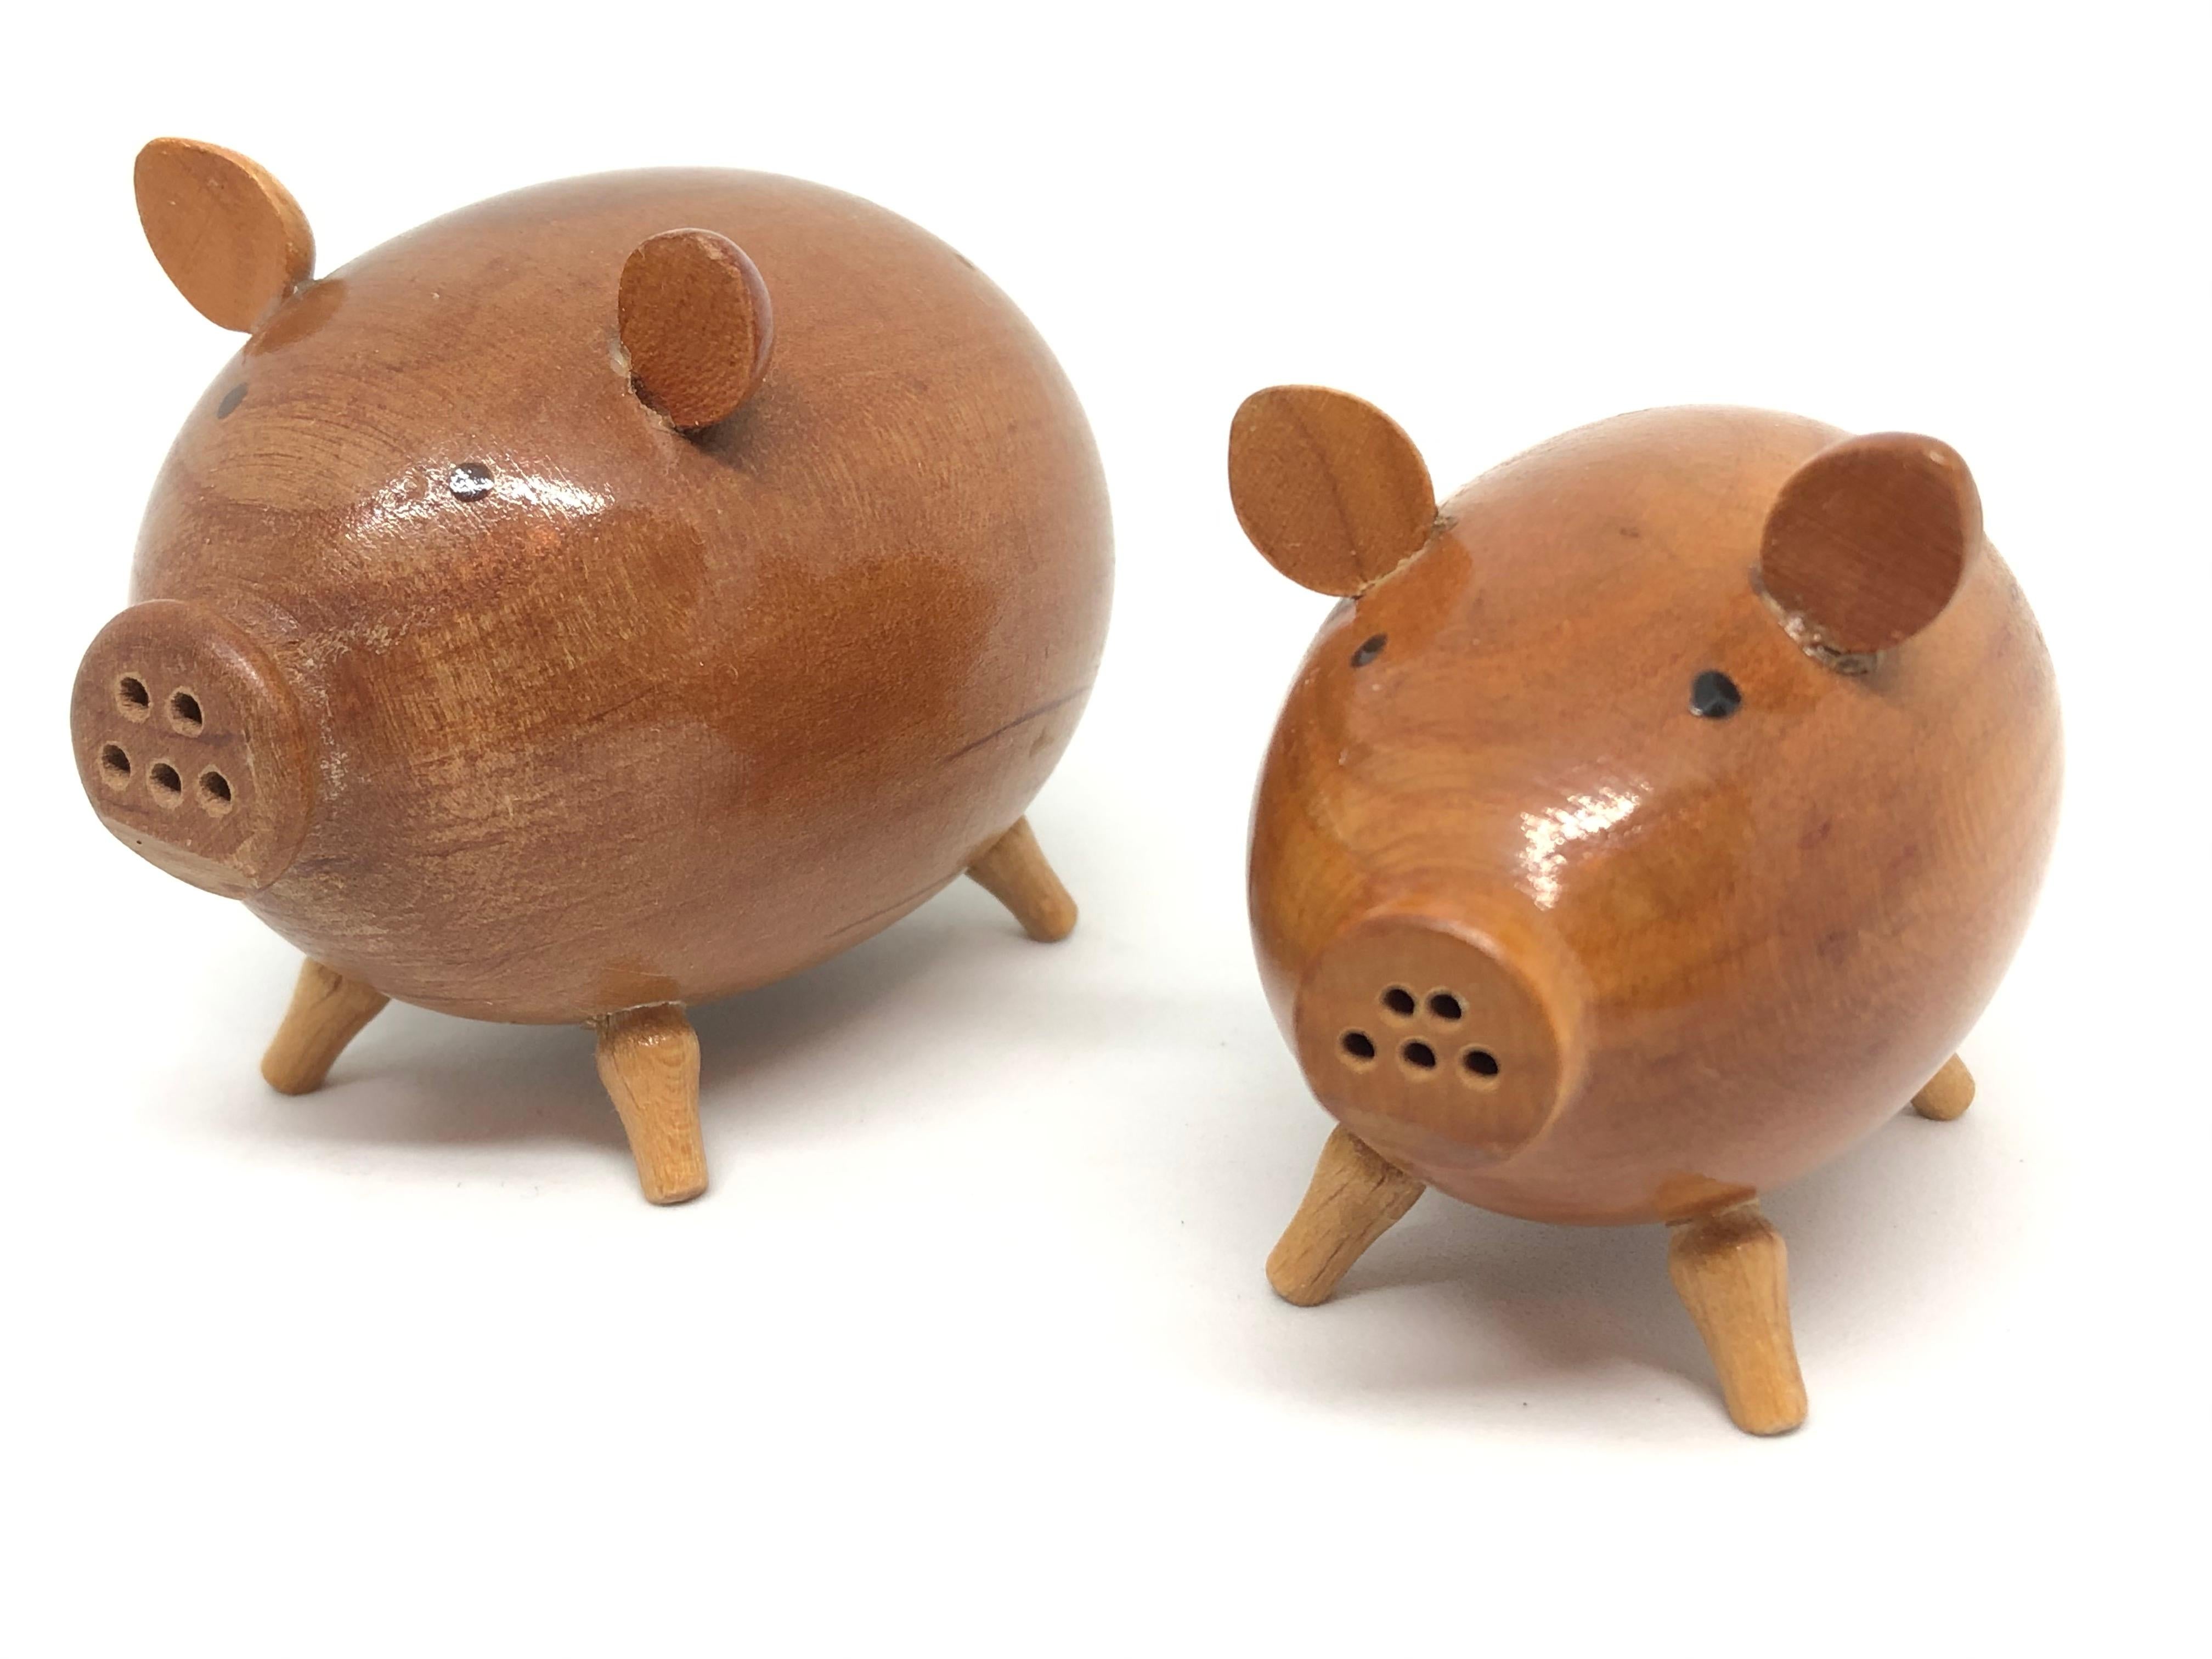 Classic early 1960s Danish design wood salt and pepper shaker set of two in the form of a pig. Nice addition to your table or just for your collection of Design items. Made of teak wood. Found at an estate sale in Vienna, Austria. The tall one is